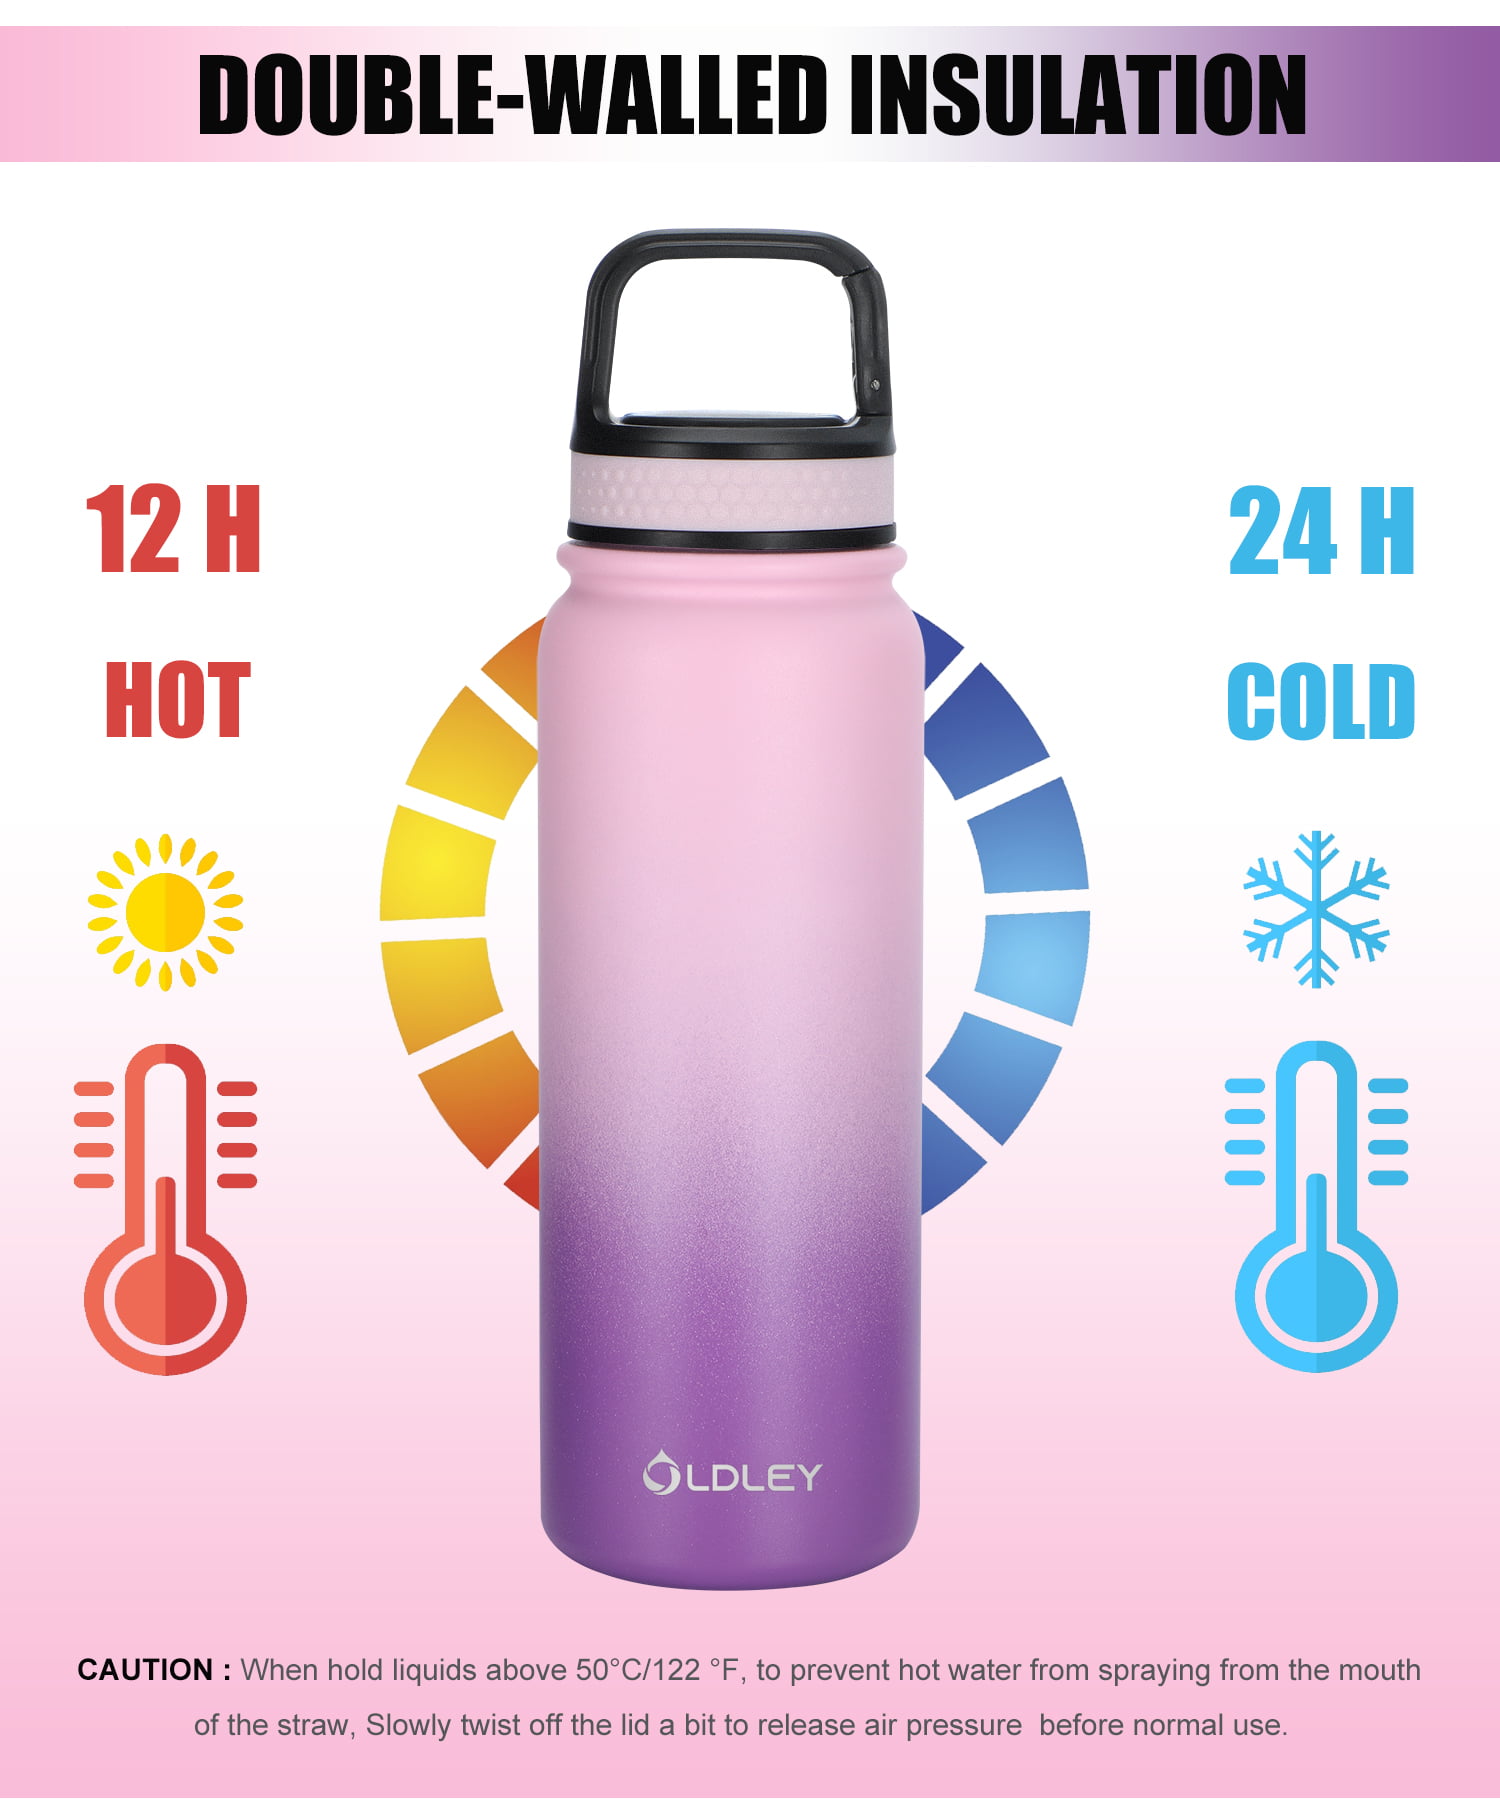 Periwinkle girlies…this one's for you 💜 #ColdCupXL #WaterBottles #Cor